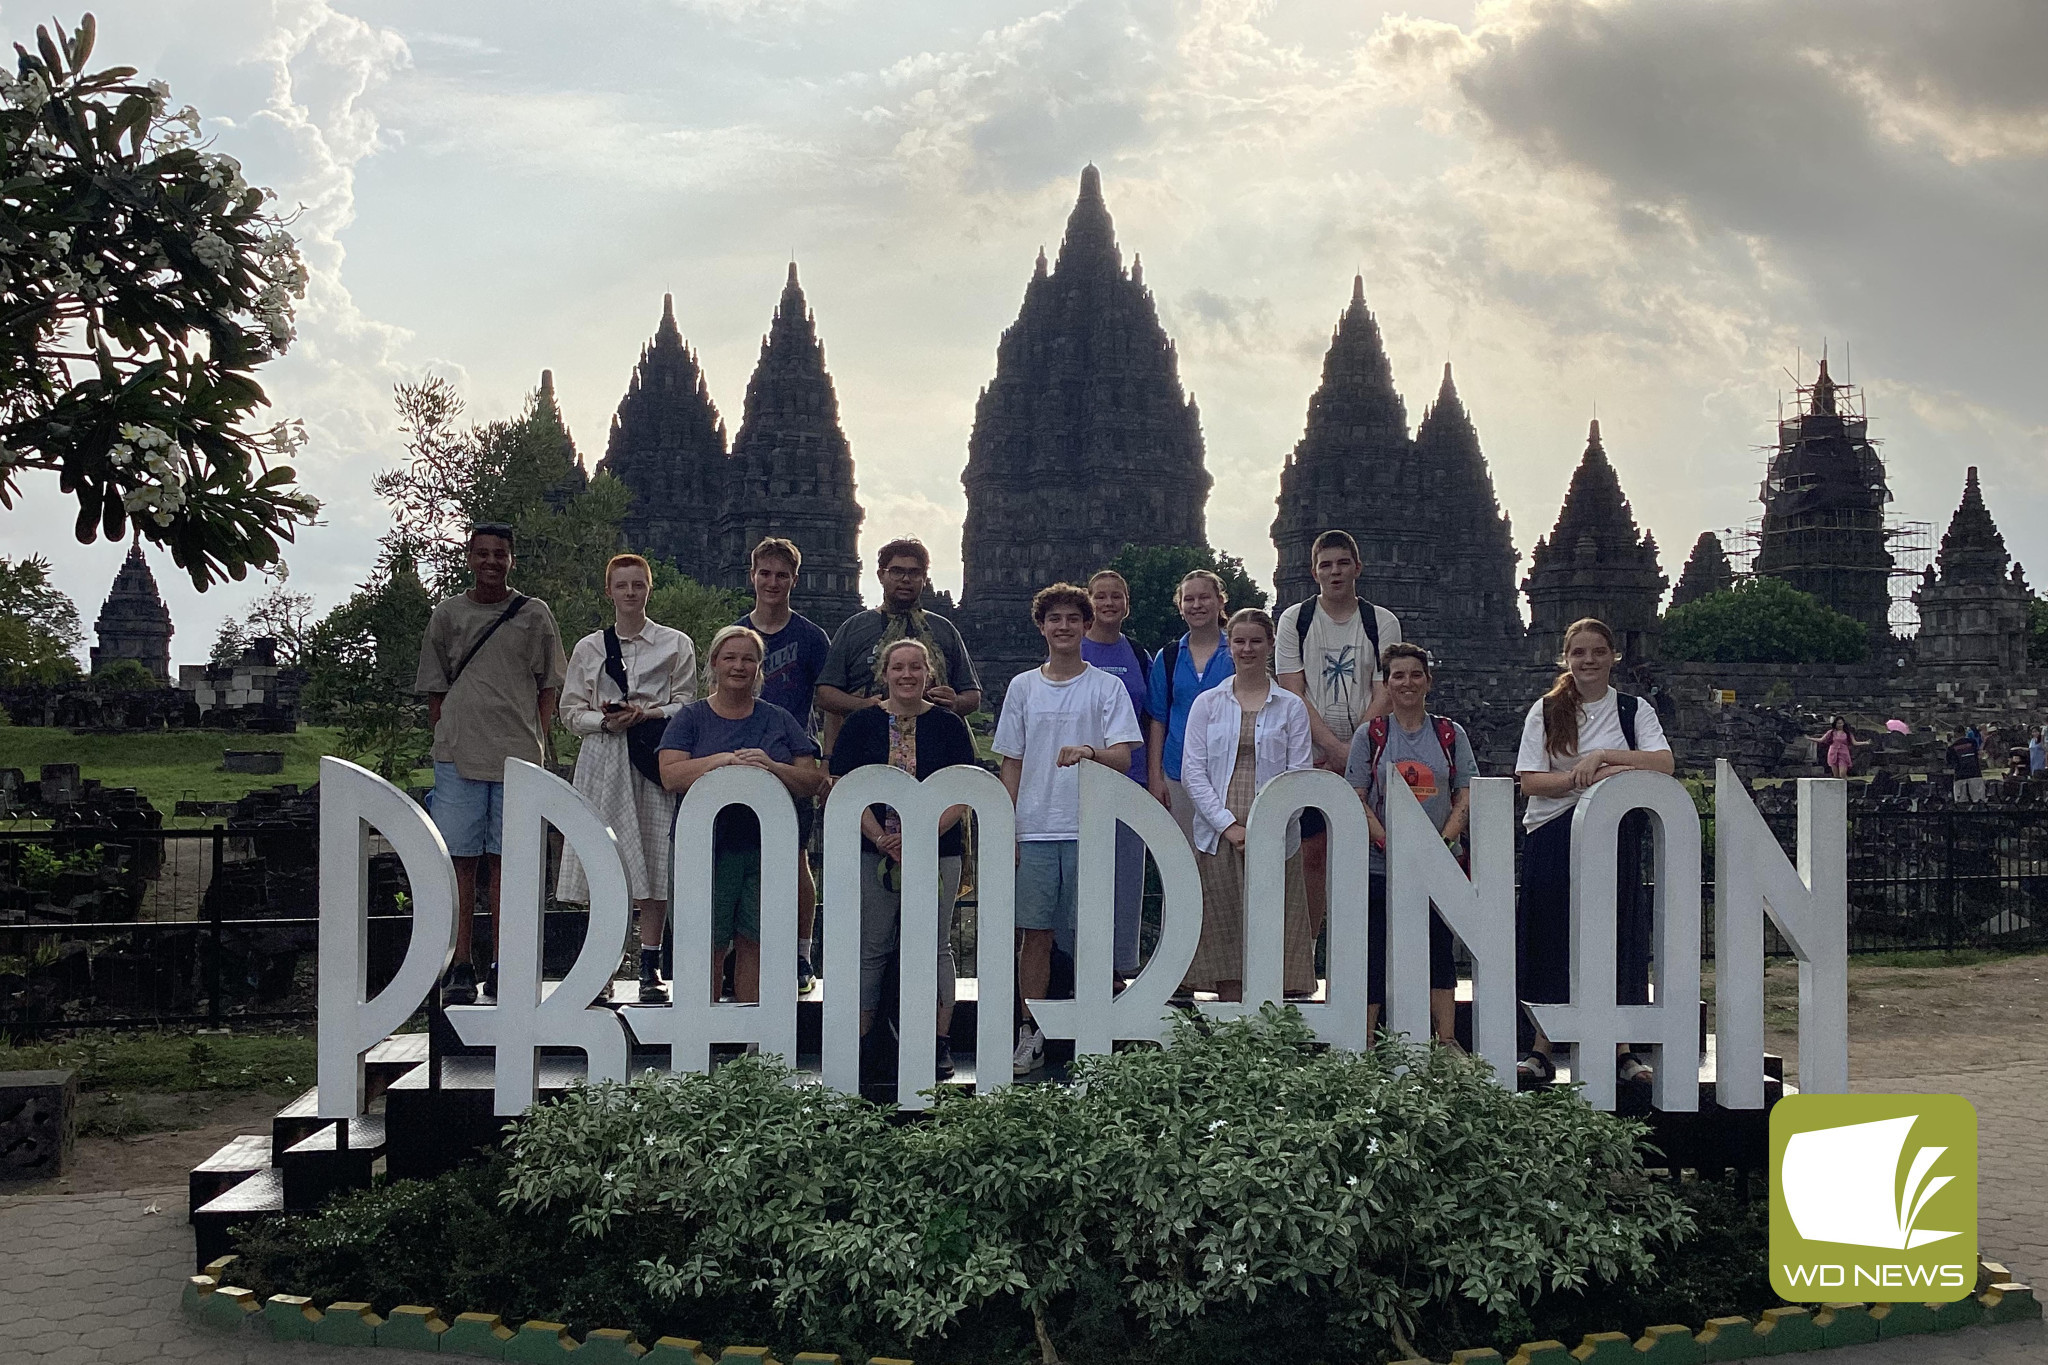 Real-life studying: A group of Camperdown College students travelled through Indonesia for 10 days recently, learning about the culture and applying their Indonesian lessons in a real-world setting.